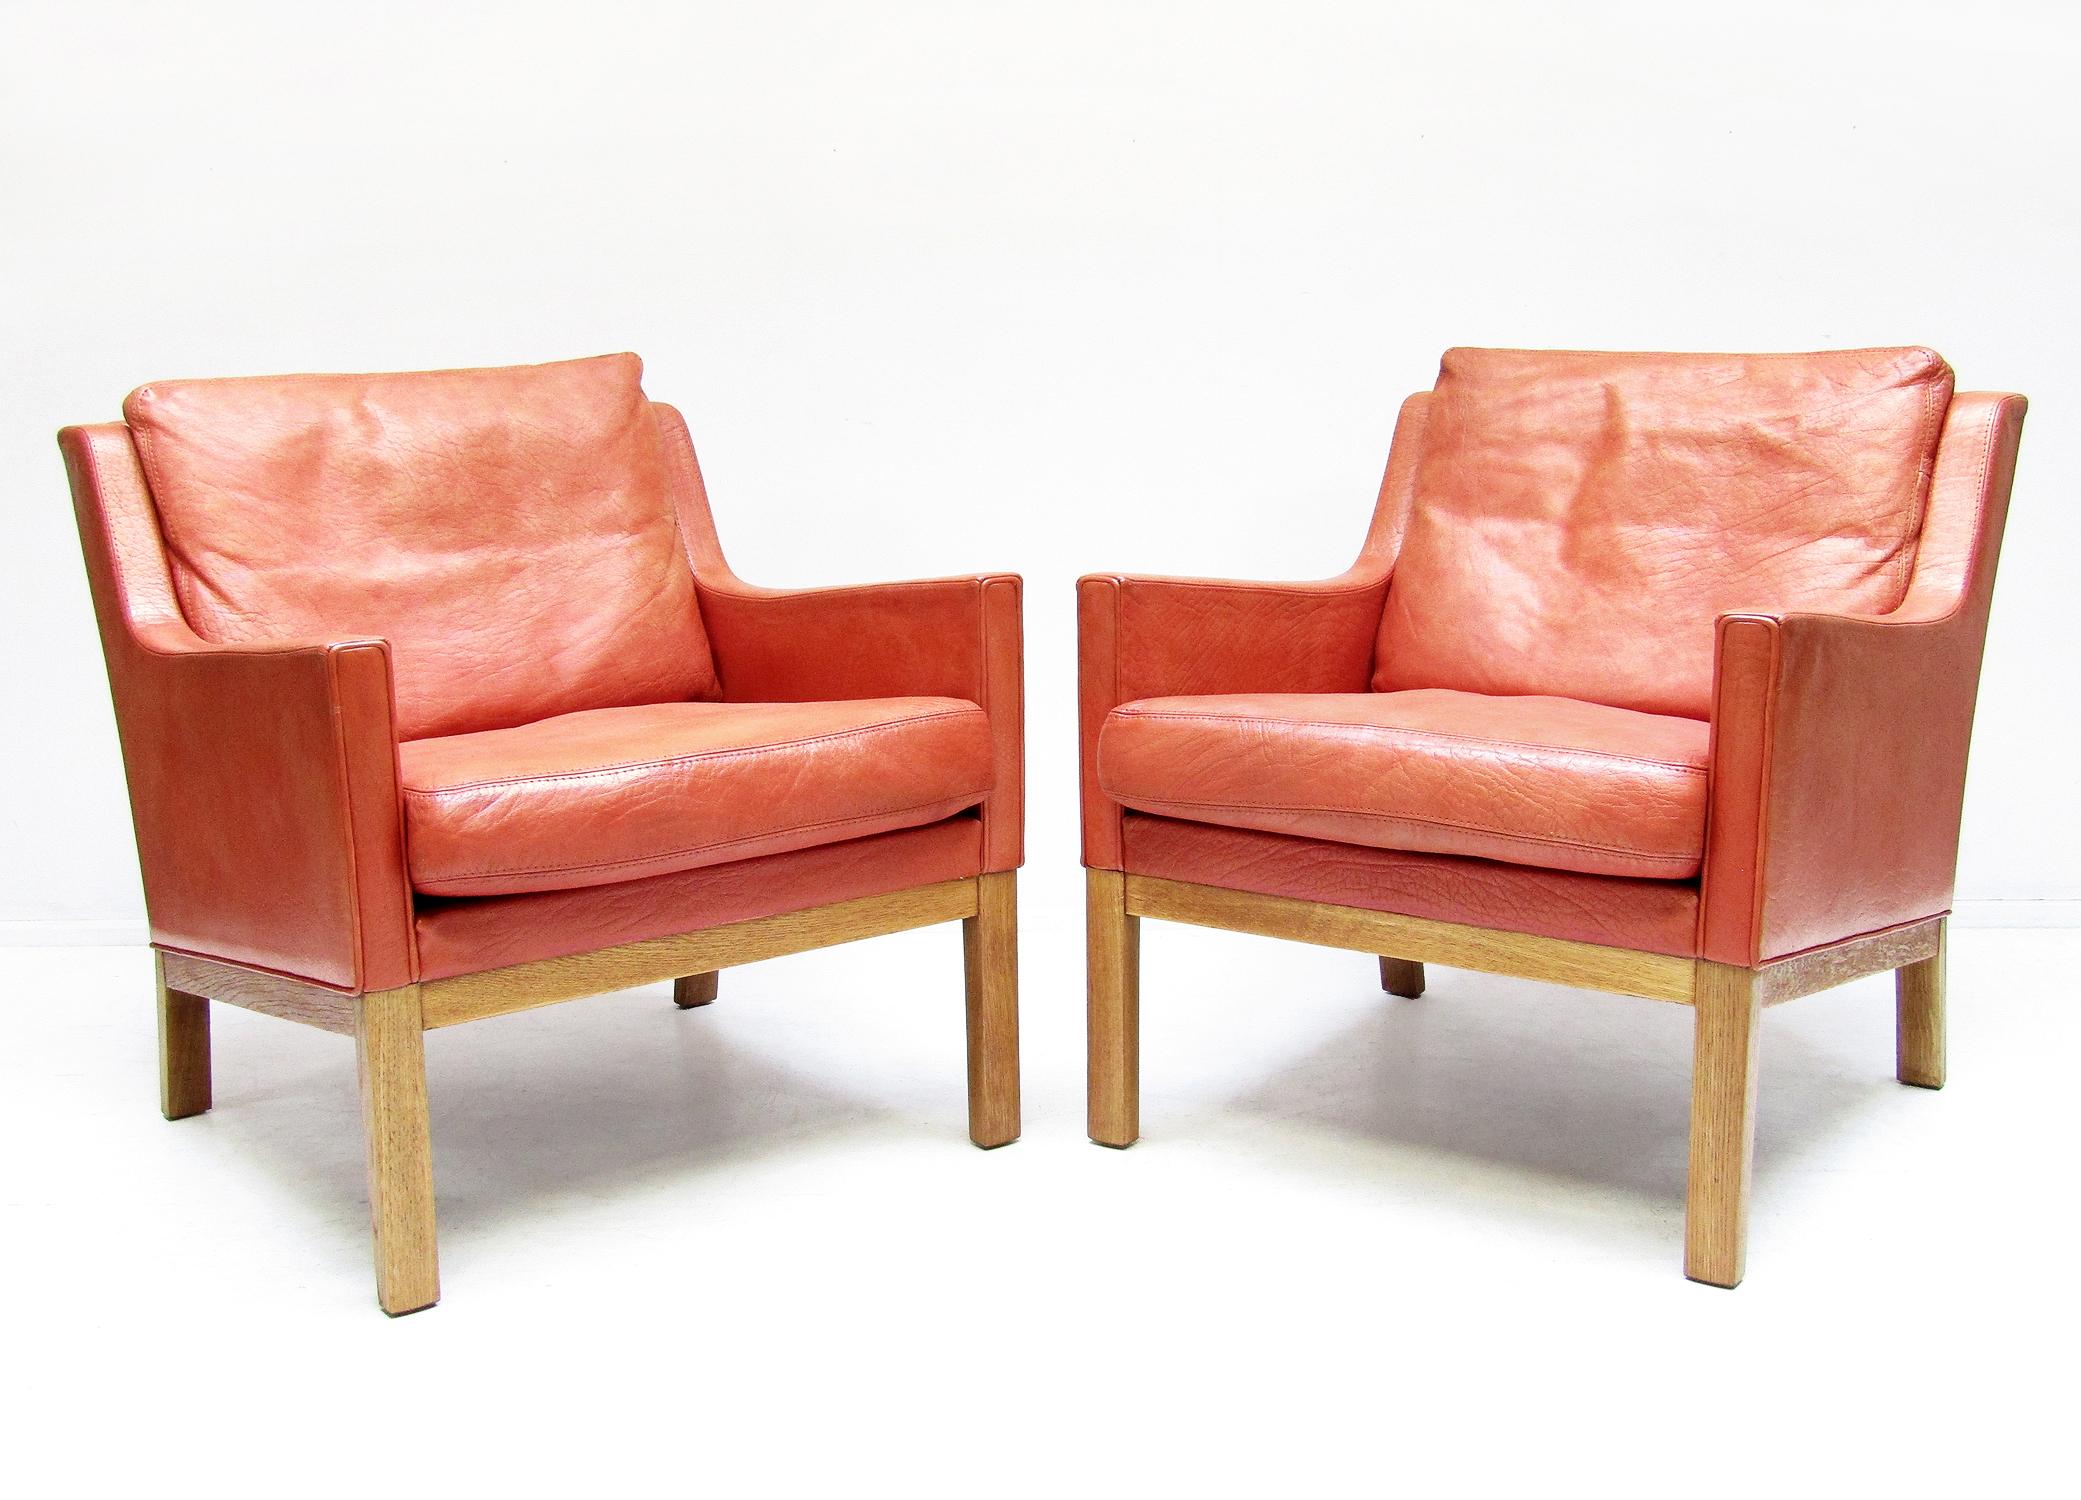 A pair of 1960s Danish lounge chairs by Kai Lyngfeldt Larsen for Søren Willadsen.

In lobster-red leather on a streamlined oak base they make a vibrant mid-century statement.

Similar to Borge Mogensen designs, the quality is typical of the